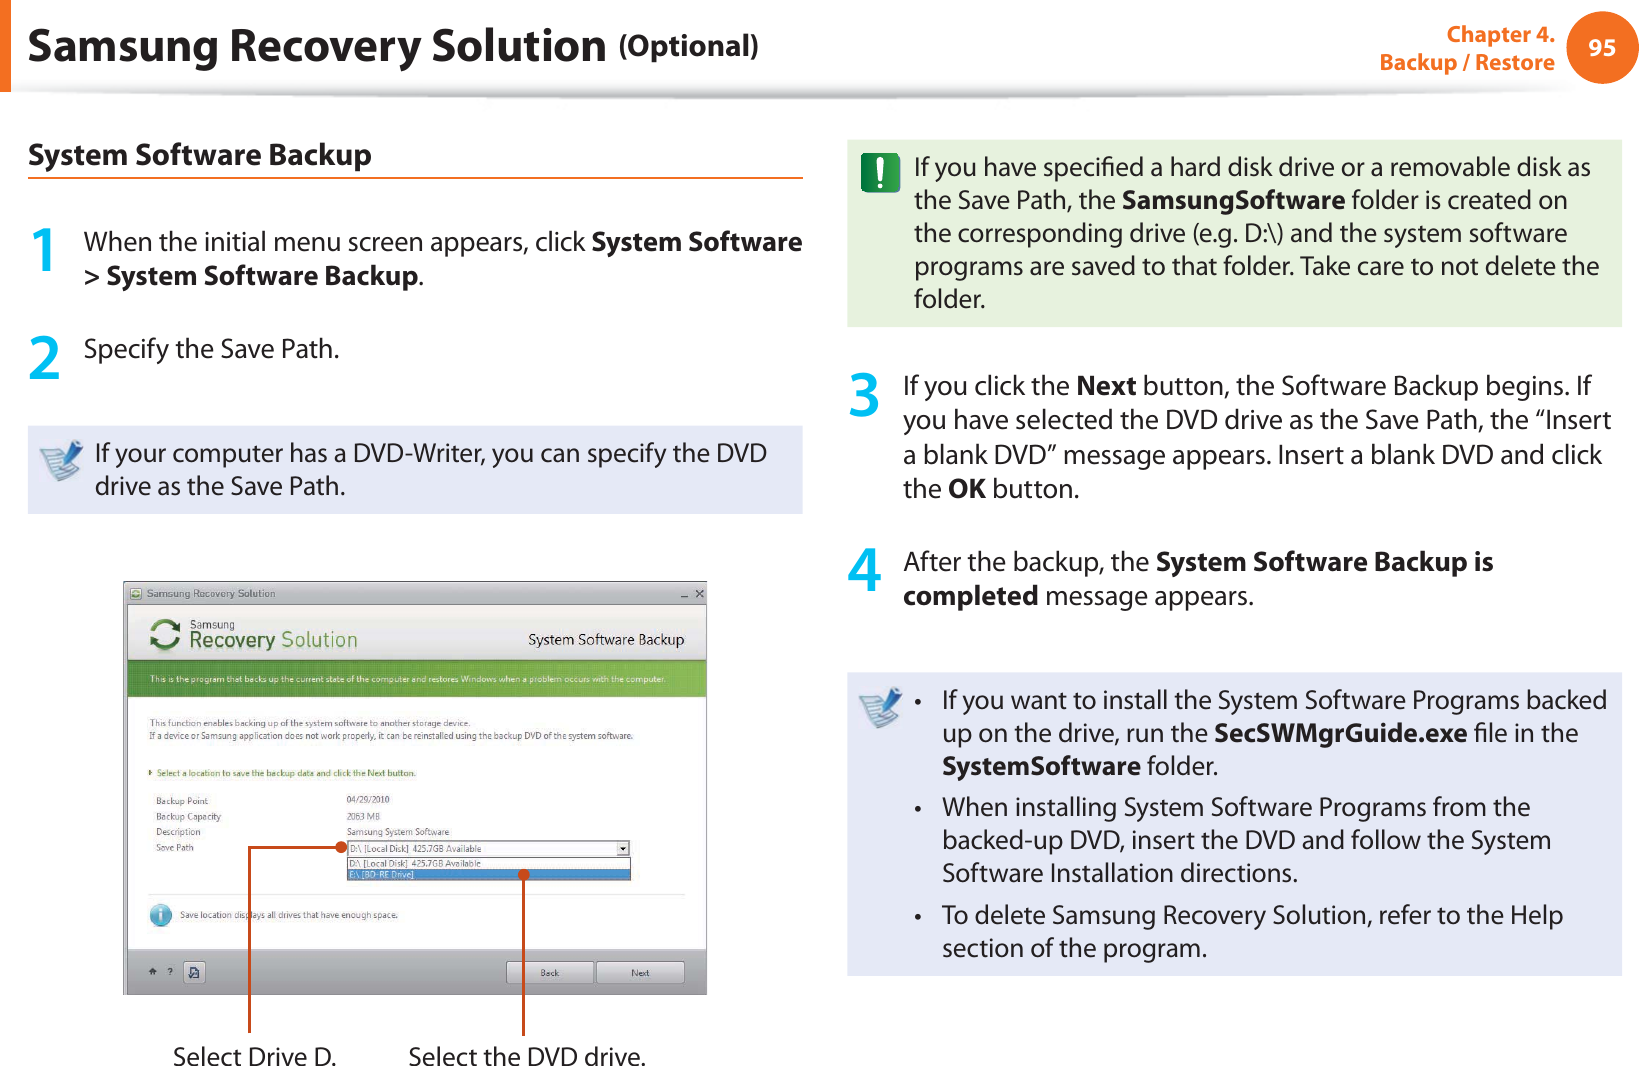 95Chapter 4.  Backup / RestoreSamsung Recovery Solution (Optional)System Software Backup1  When the initial menu screen appears, click System Software &gt; System Software Backup.2  Specify the Save Path. If your computer has a DVD-Writer, you can specify the DVD drive as the Save Path.Select Drive D. Select the DVD drive.If you have speci ed a hard disk drive or a removable disk as the Save Path, the SamsungSoftware folder is created on the corresponding drive (e.g. D:\) and the system software programs are saved to that folder. Take care to not delete the folder. 3  If you click the Next button, the Software Backup begins. If you have selected the DVD drive as the Save Path, the “Insert a blank DVD” message appears. Insert a blank DVD and click the OK button.4  After the backup, the System Software Backup is completed message appears.If you want to install the System Software Programs backed t up on the drive, run the SecSWMgrGuide.exe  le in the SystemSoftware folder.When installing System Software Programs from the t backed-up DVD, insert the DVD and follow the System Software Installation directions.To delete Samsung Recovery Solution, refer to the Help t section of the program.